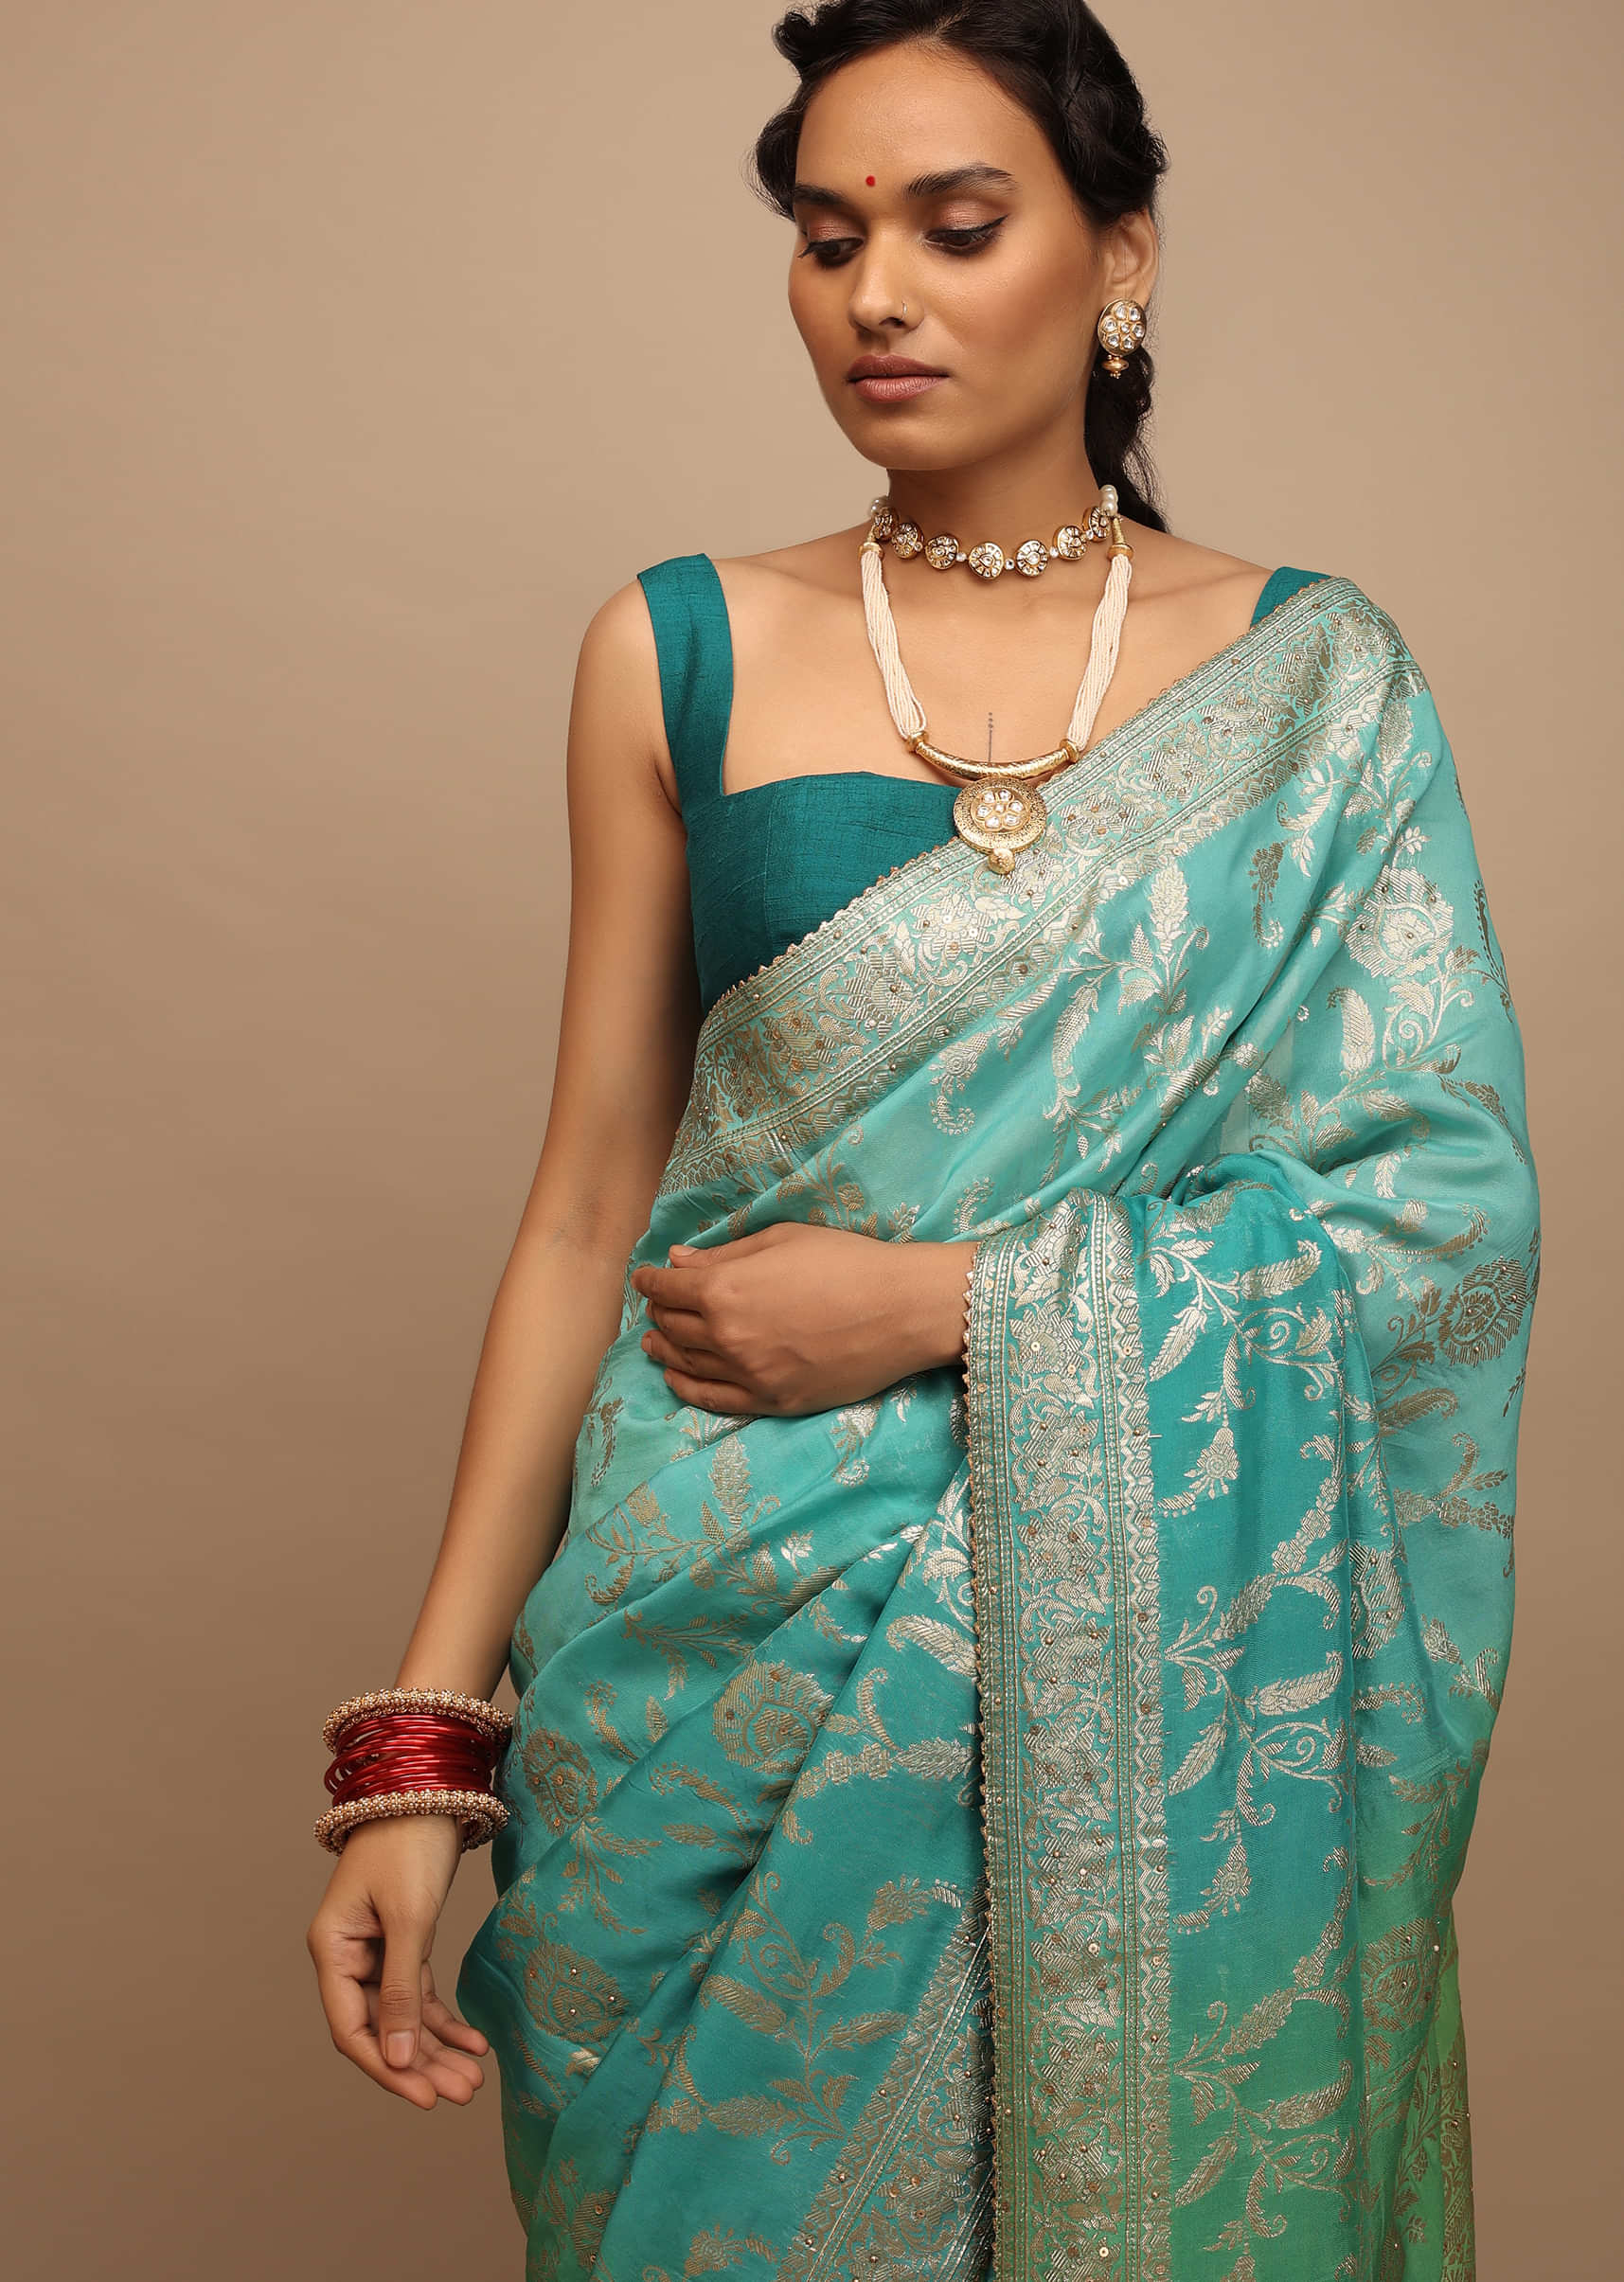 Sea Green And Turquoise Saree In Georgette With Woven Floral Jaal